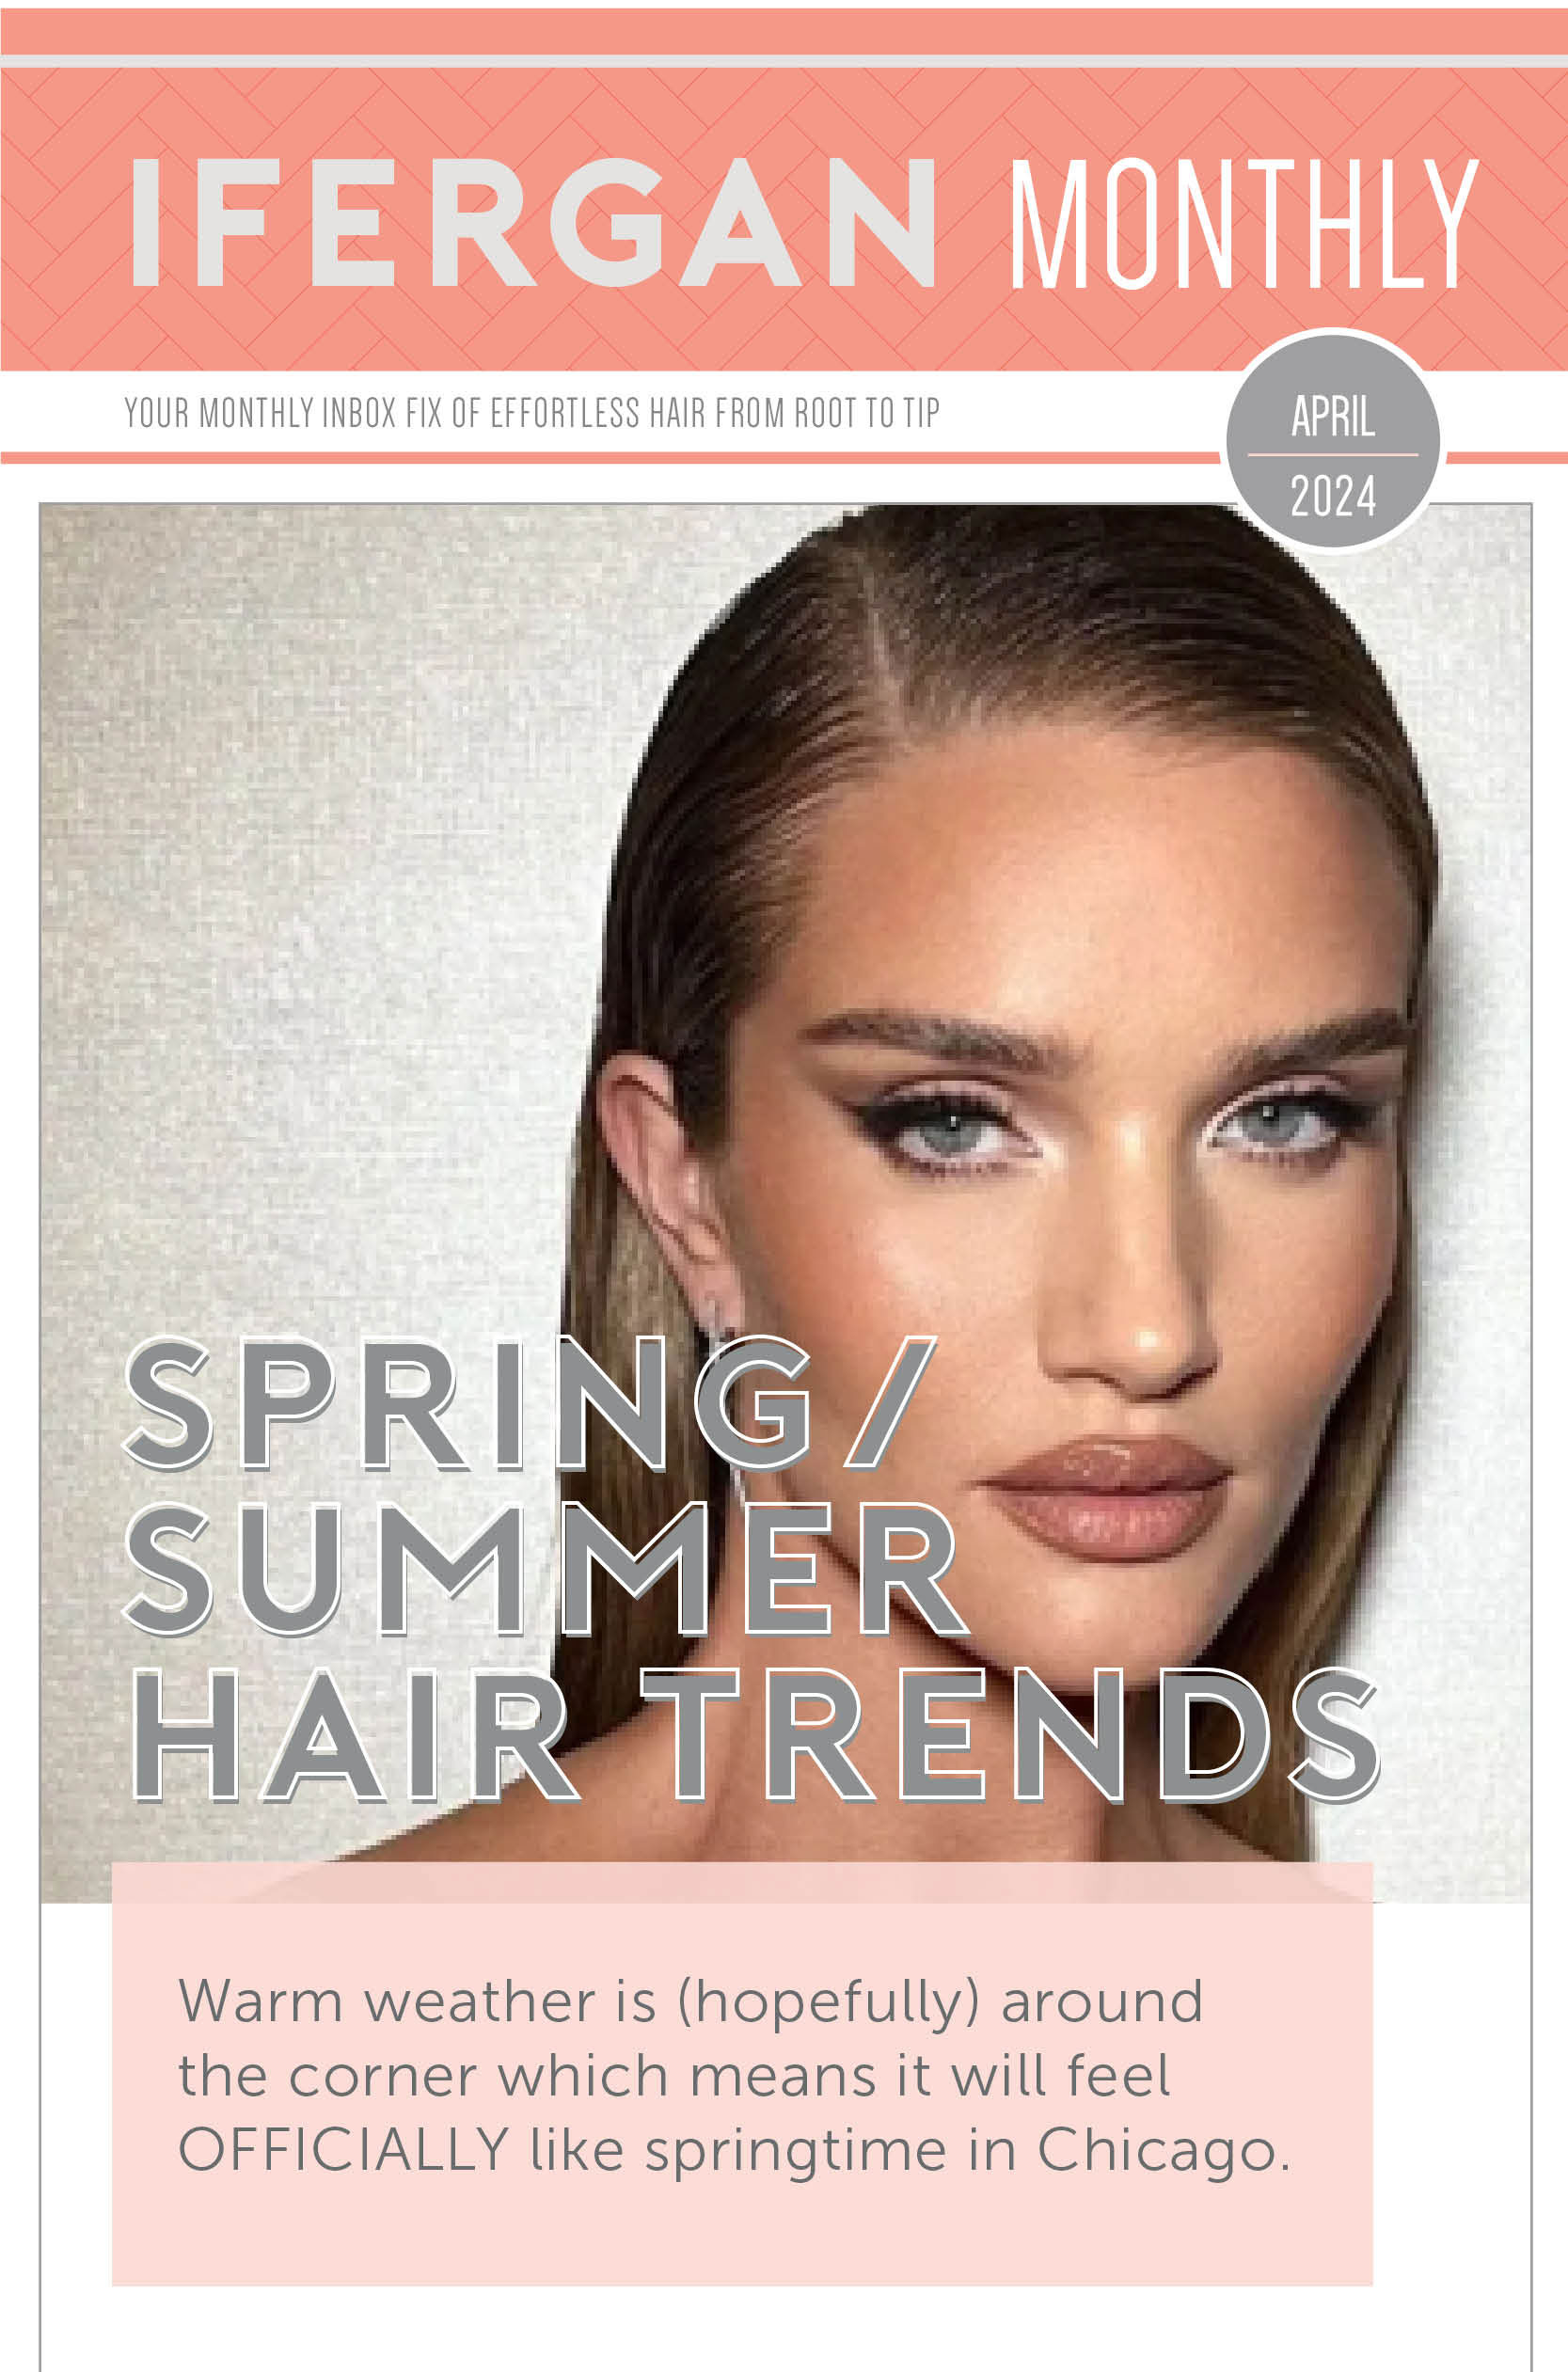 April 2024 Newsletter - Spring/Summer Hair Trends. Warm weather is (hopefully) around the corner which means it will feel OFFICIALLY like springtime in Chicago.